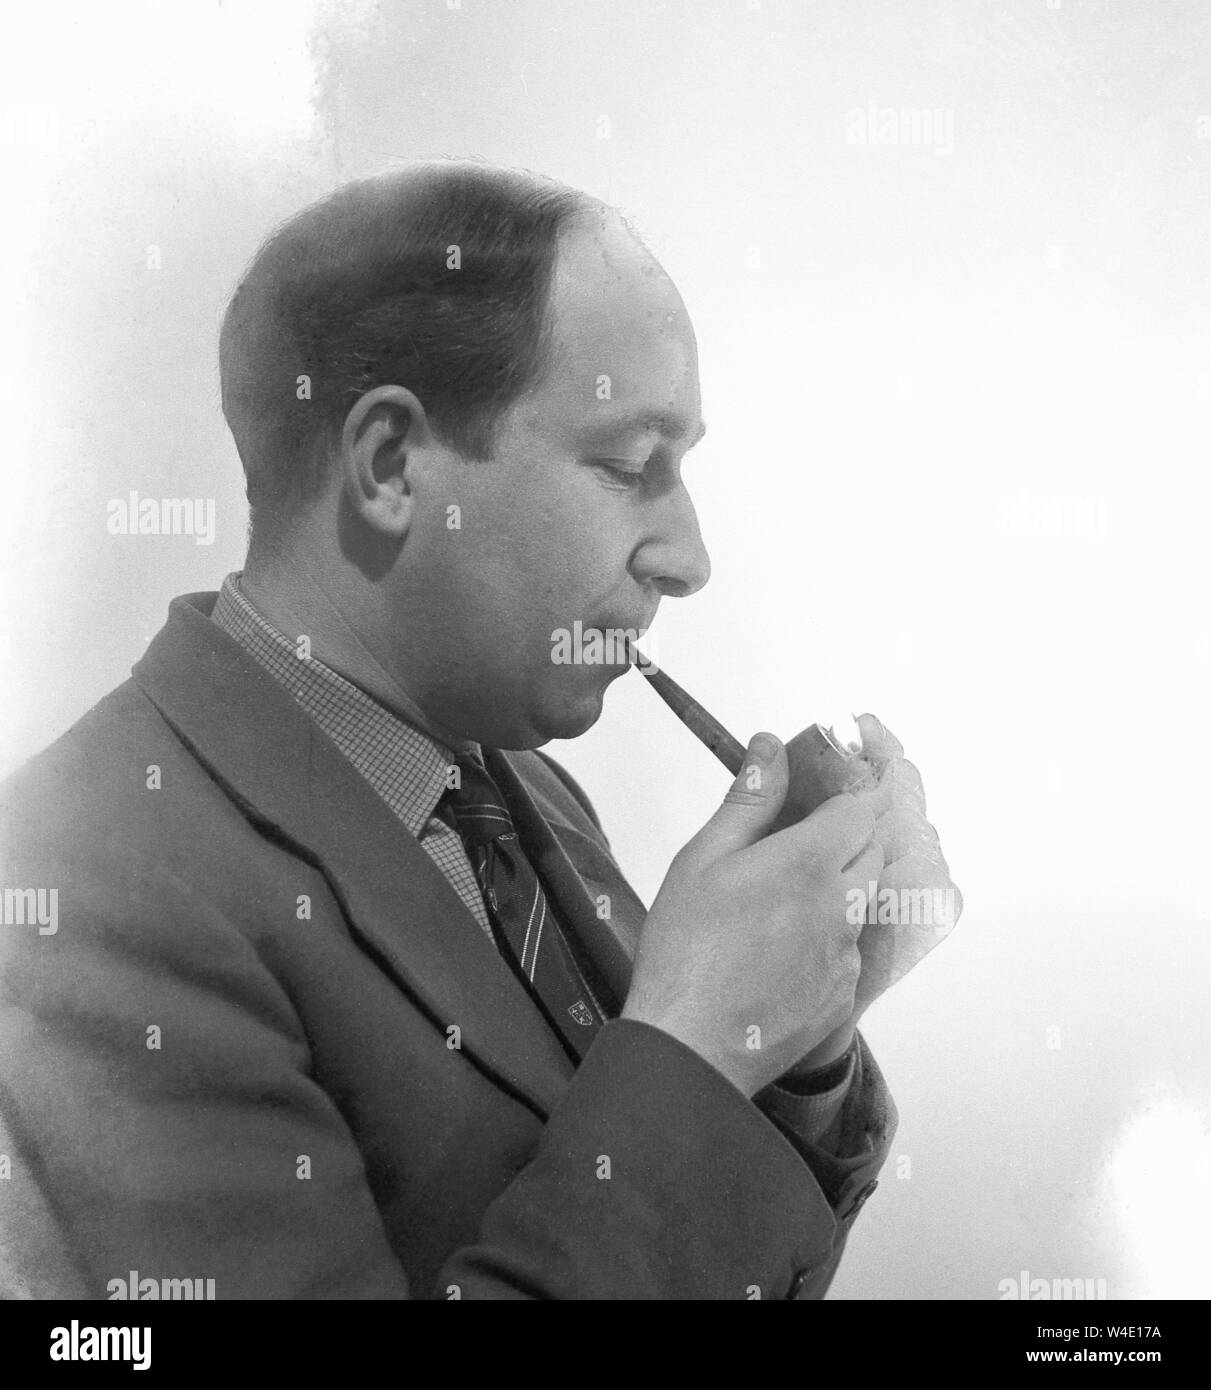 1950s, historical, man wearing a jacket and tie smoking a just lit pipe, with a flame showing, Stock Photo